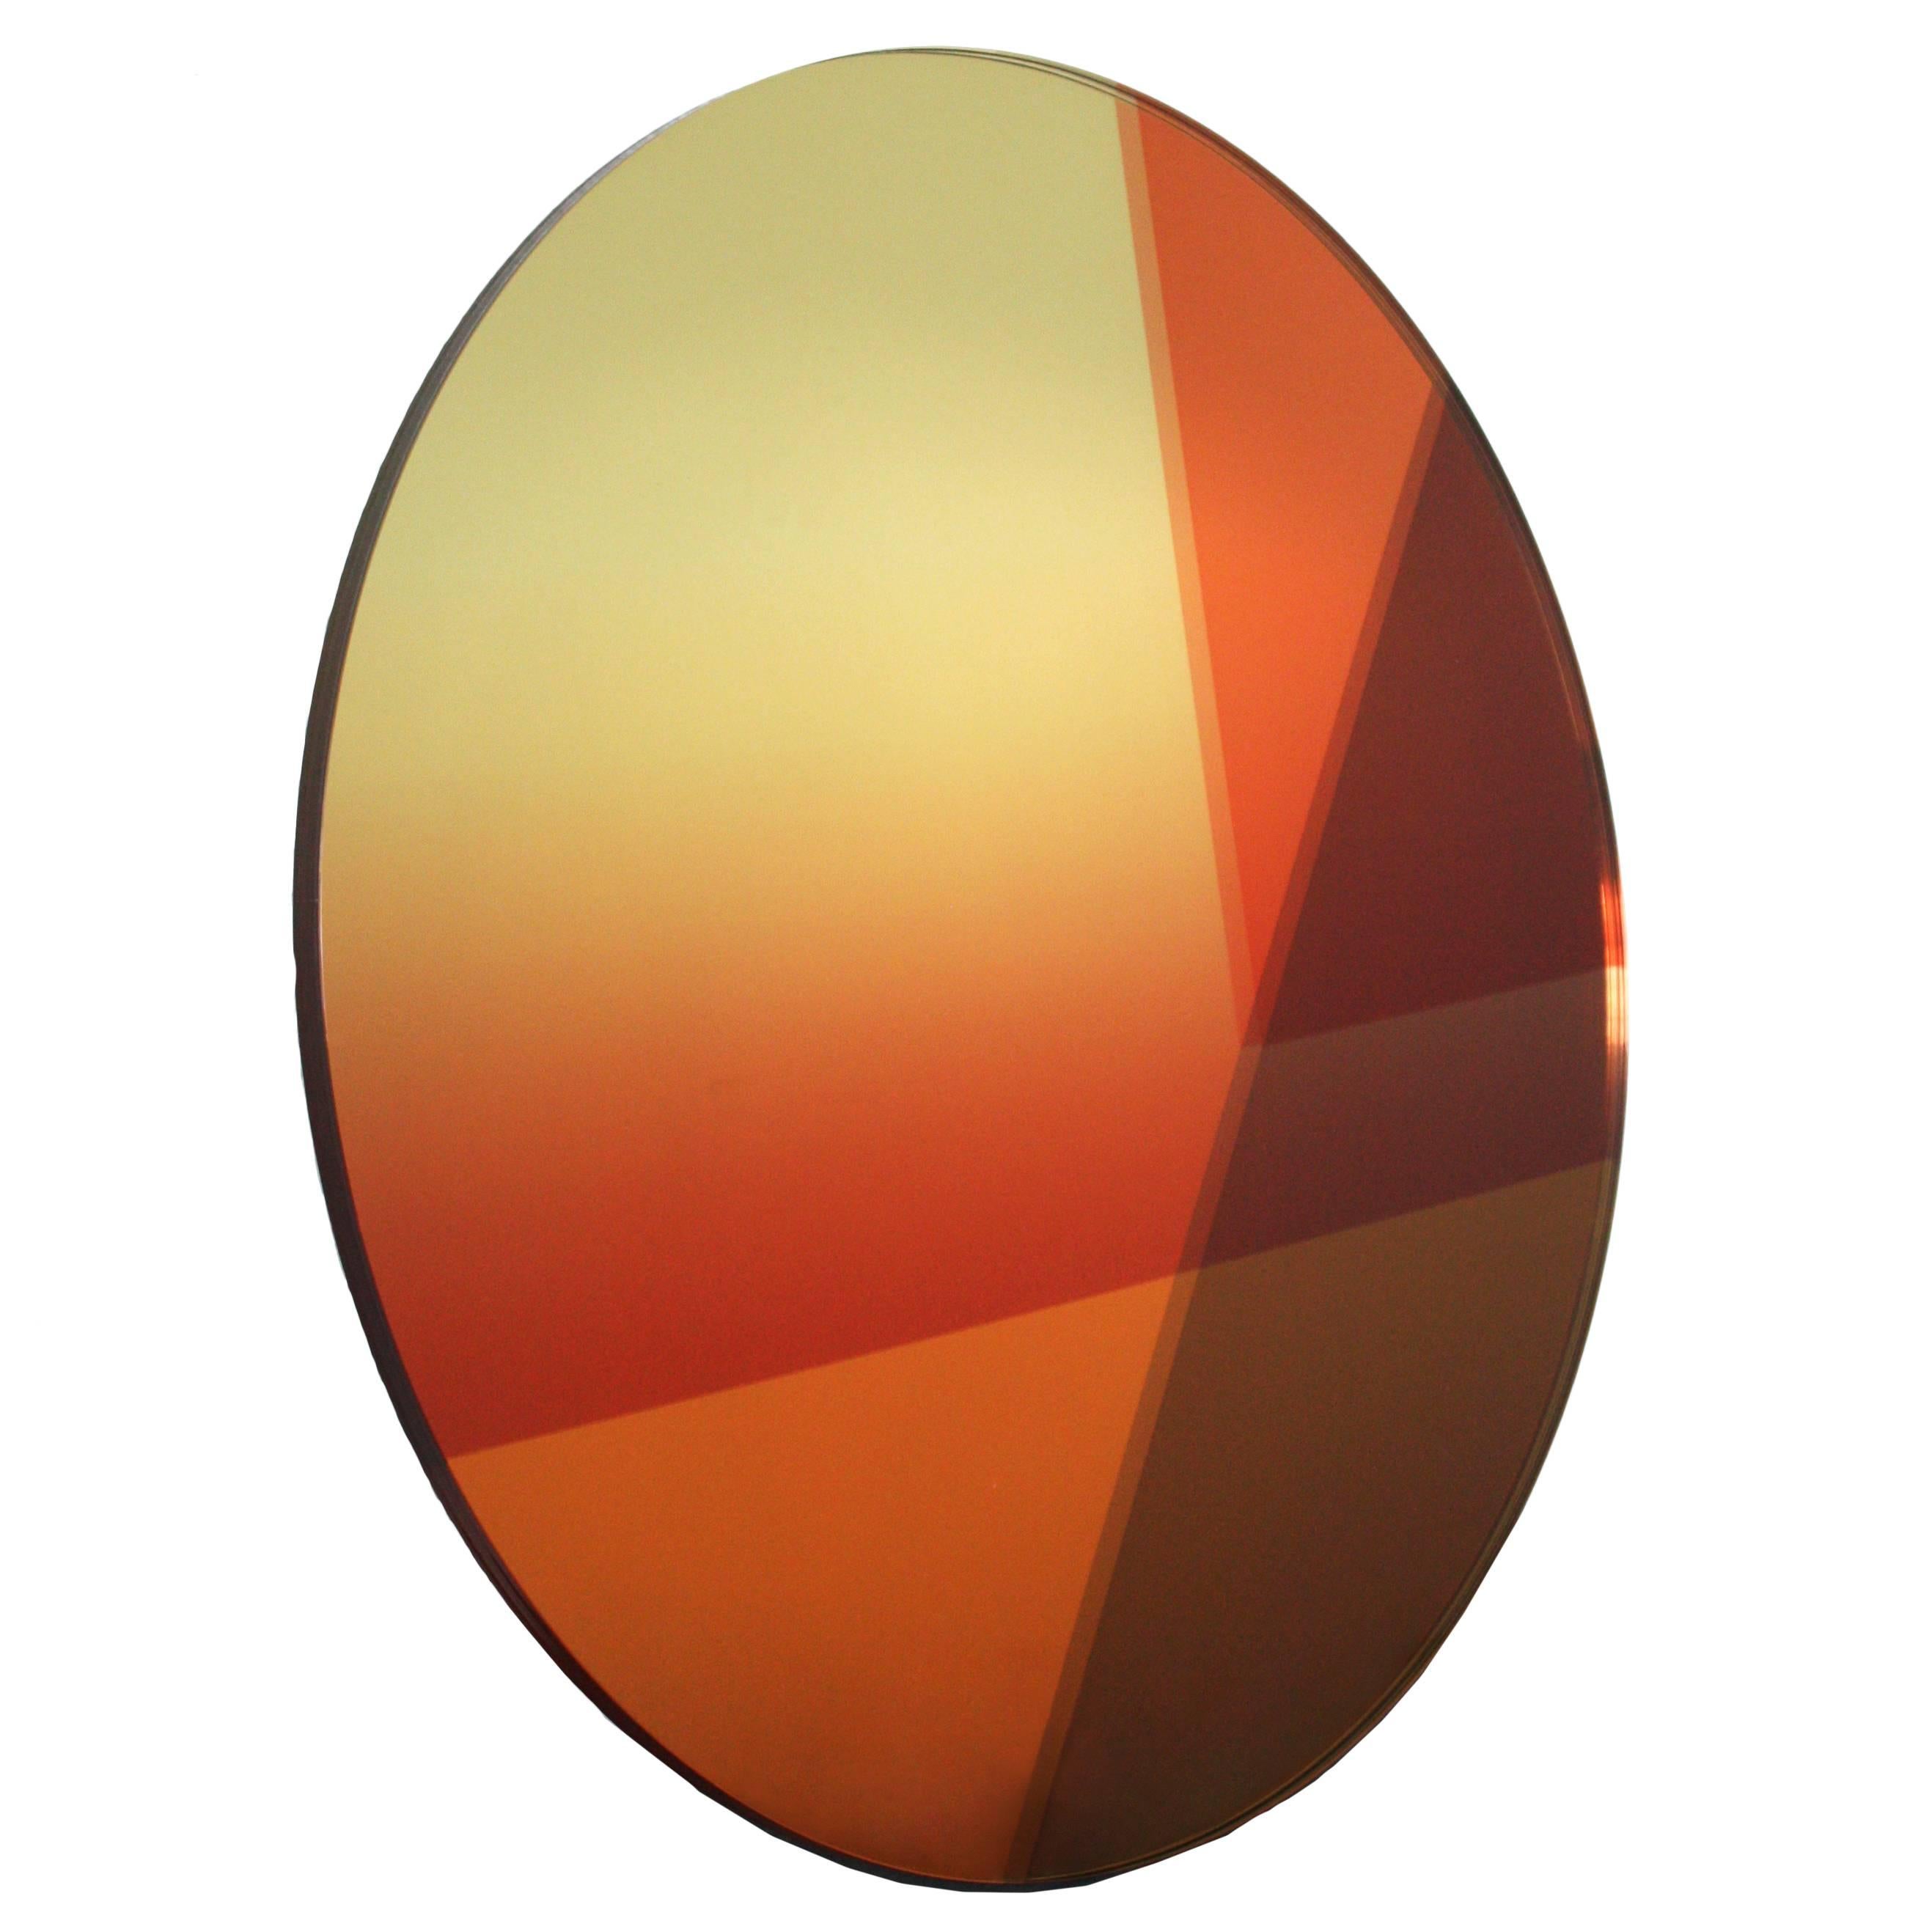  Contemporary Round Mirror 77 cm, Seeing Glass Series by Sabine Marcelis, Gold